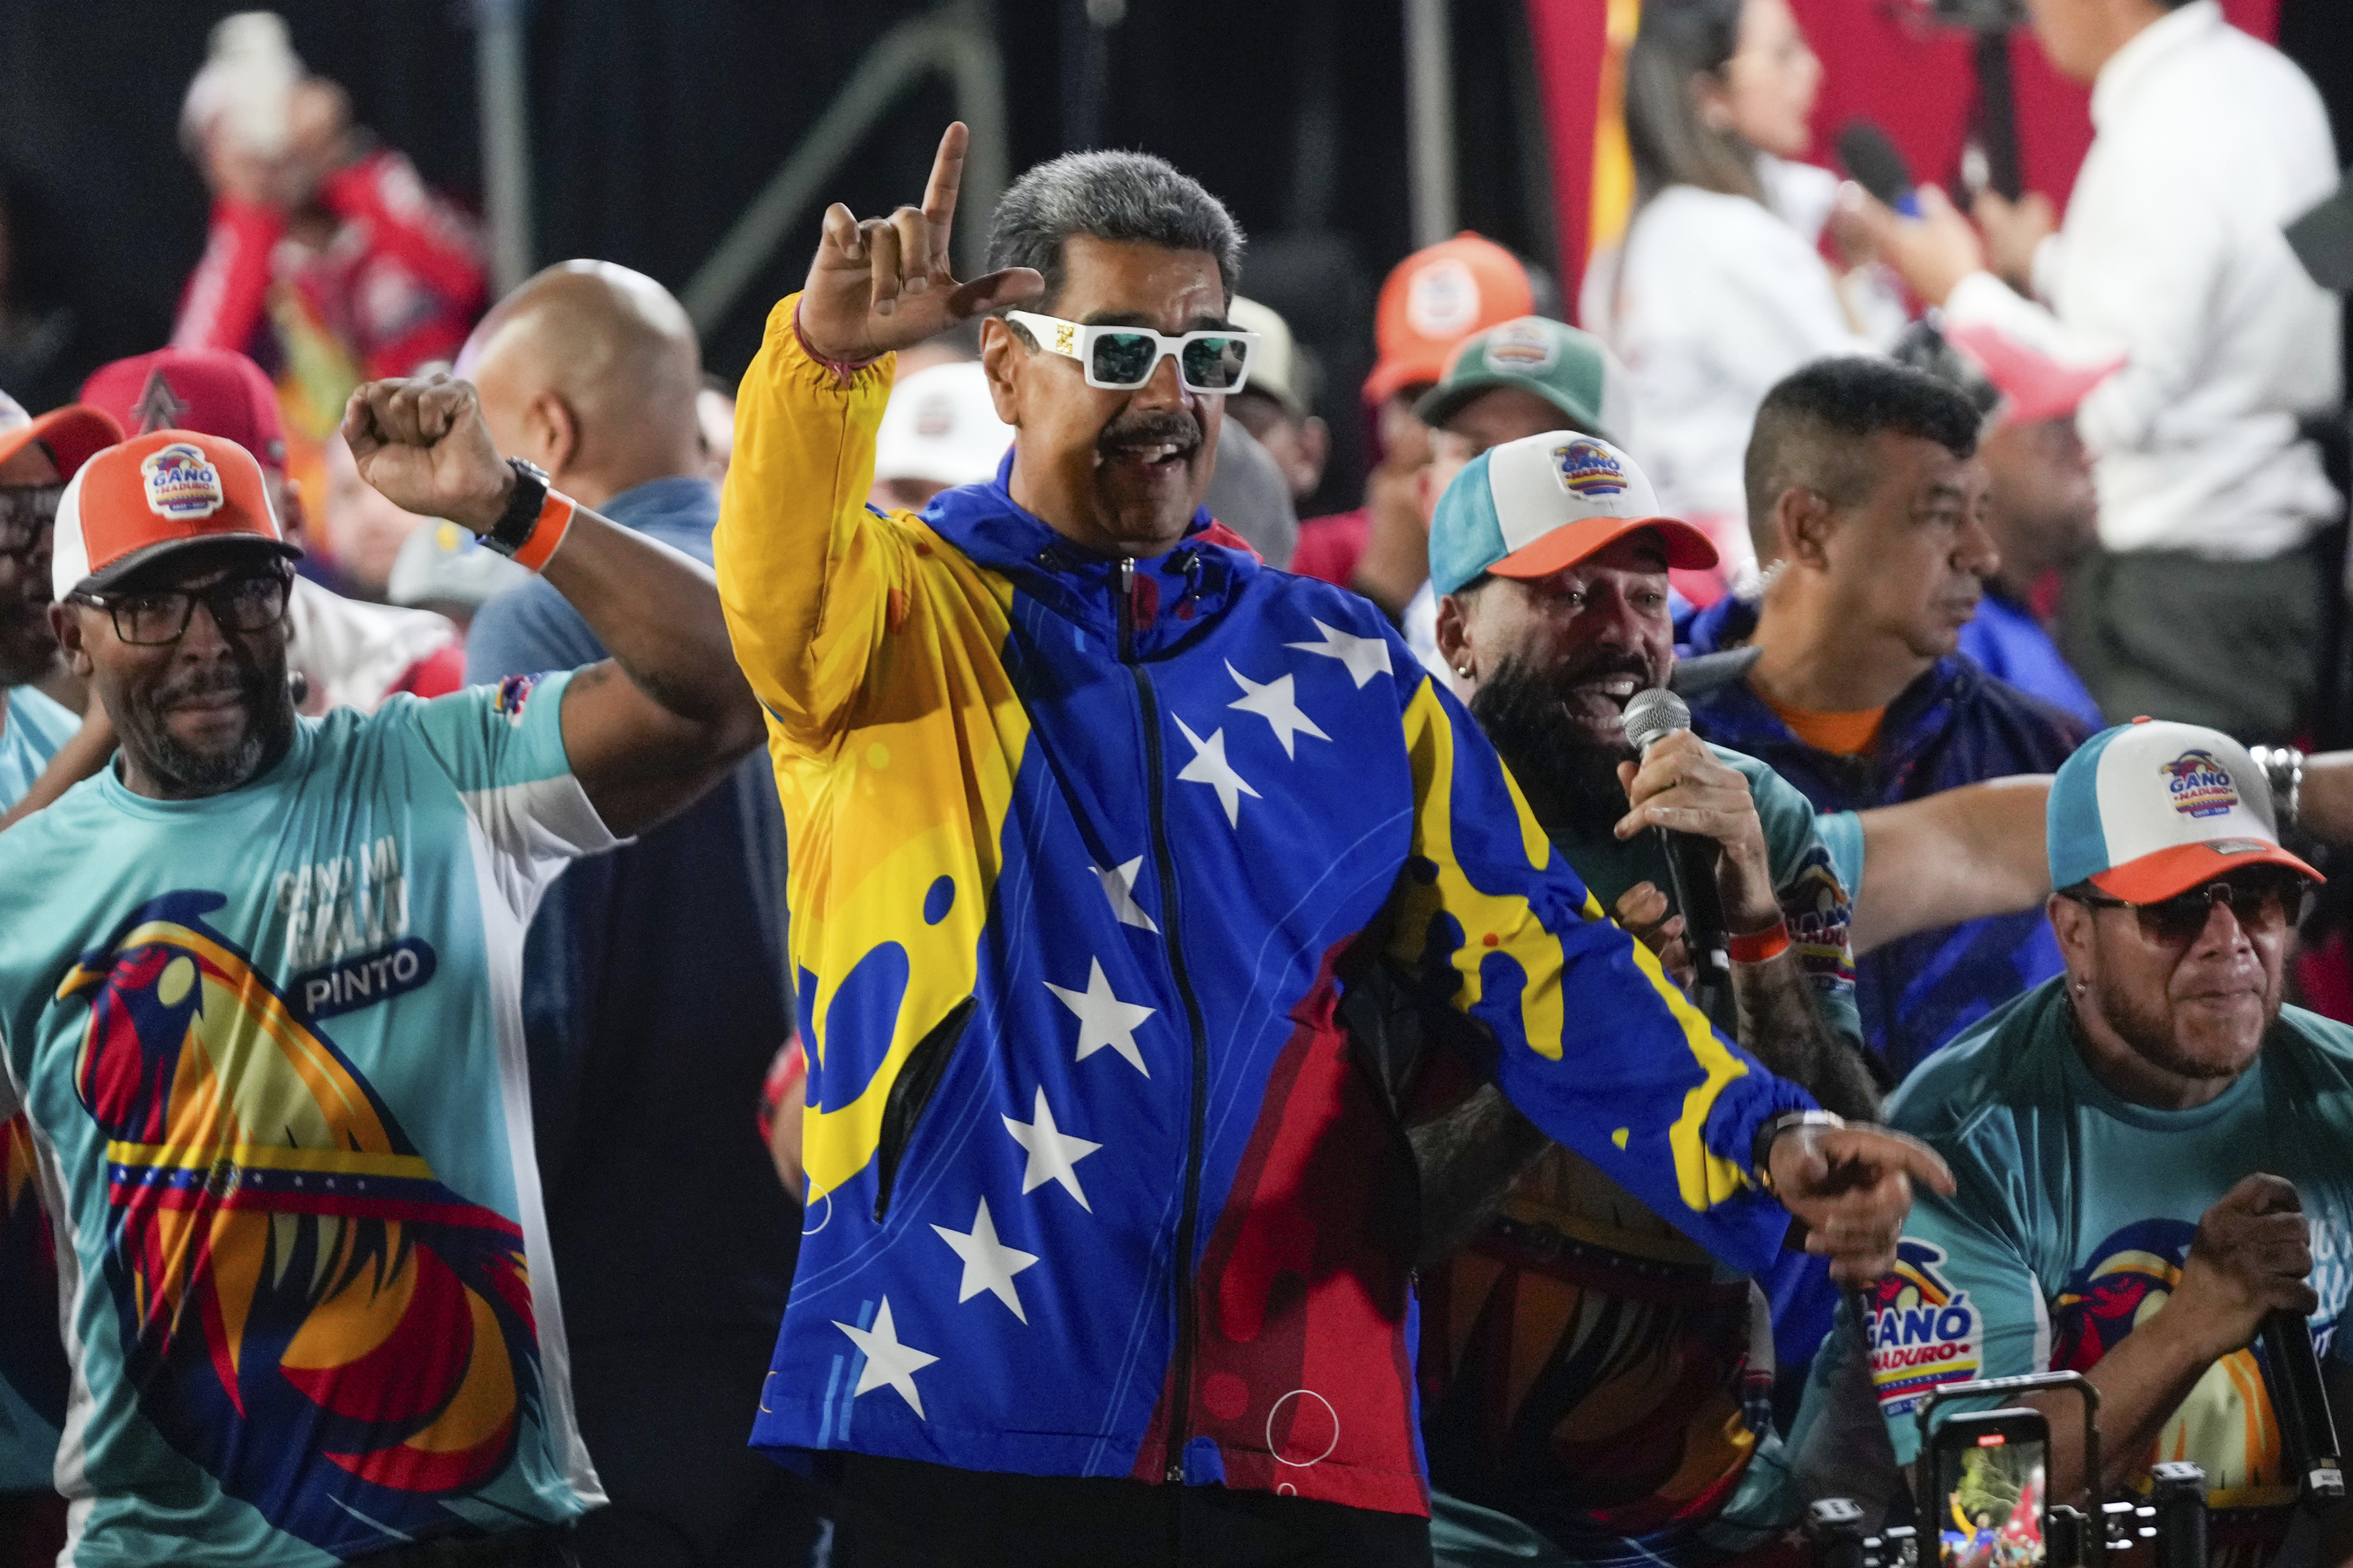 What's Next for Venezuela After Maduro's Dubious Reelection?